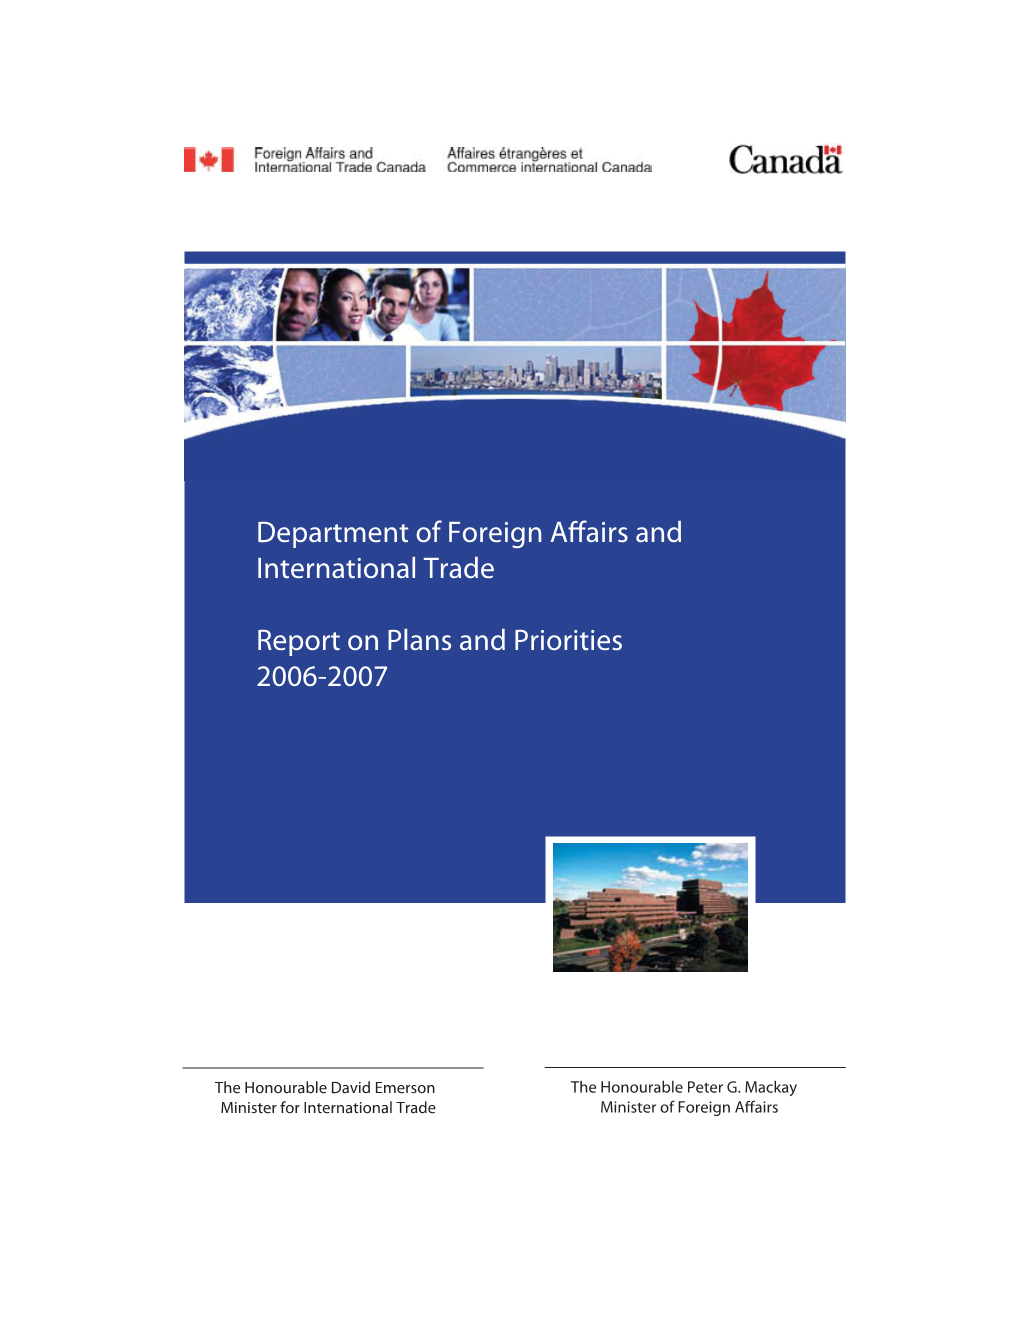 Department of Foreign Affairs and International Trade Report on Plans